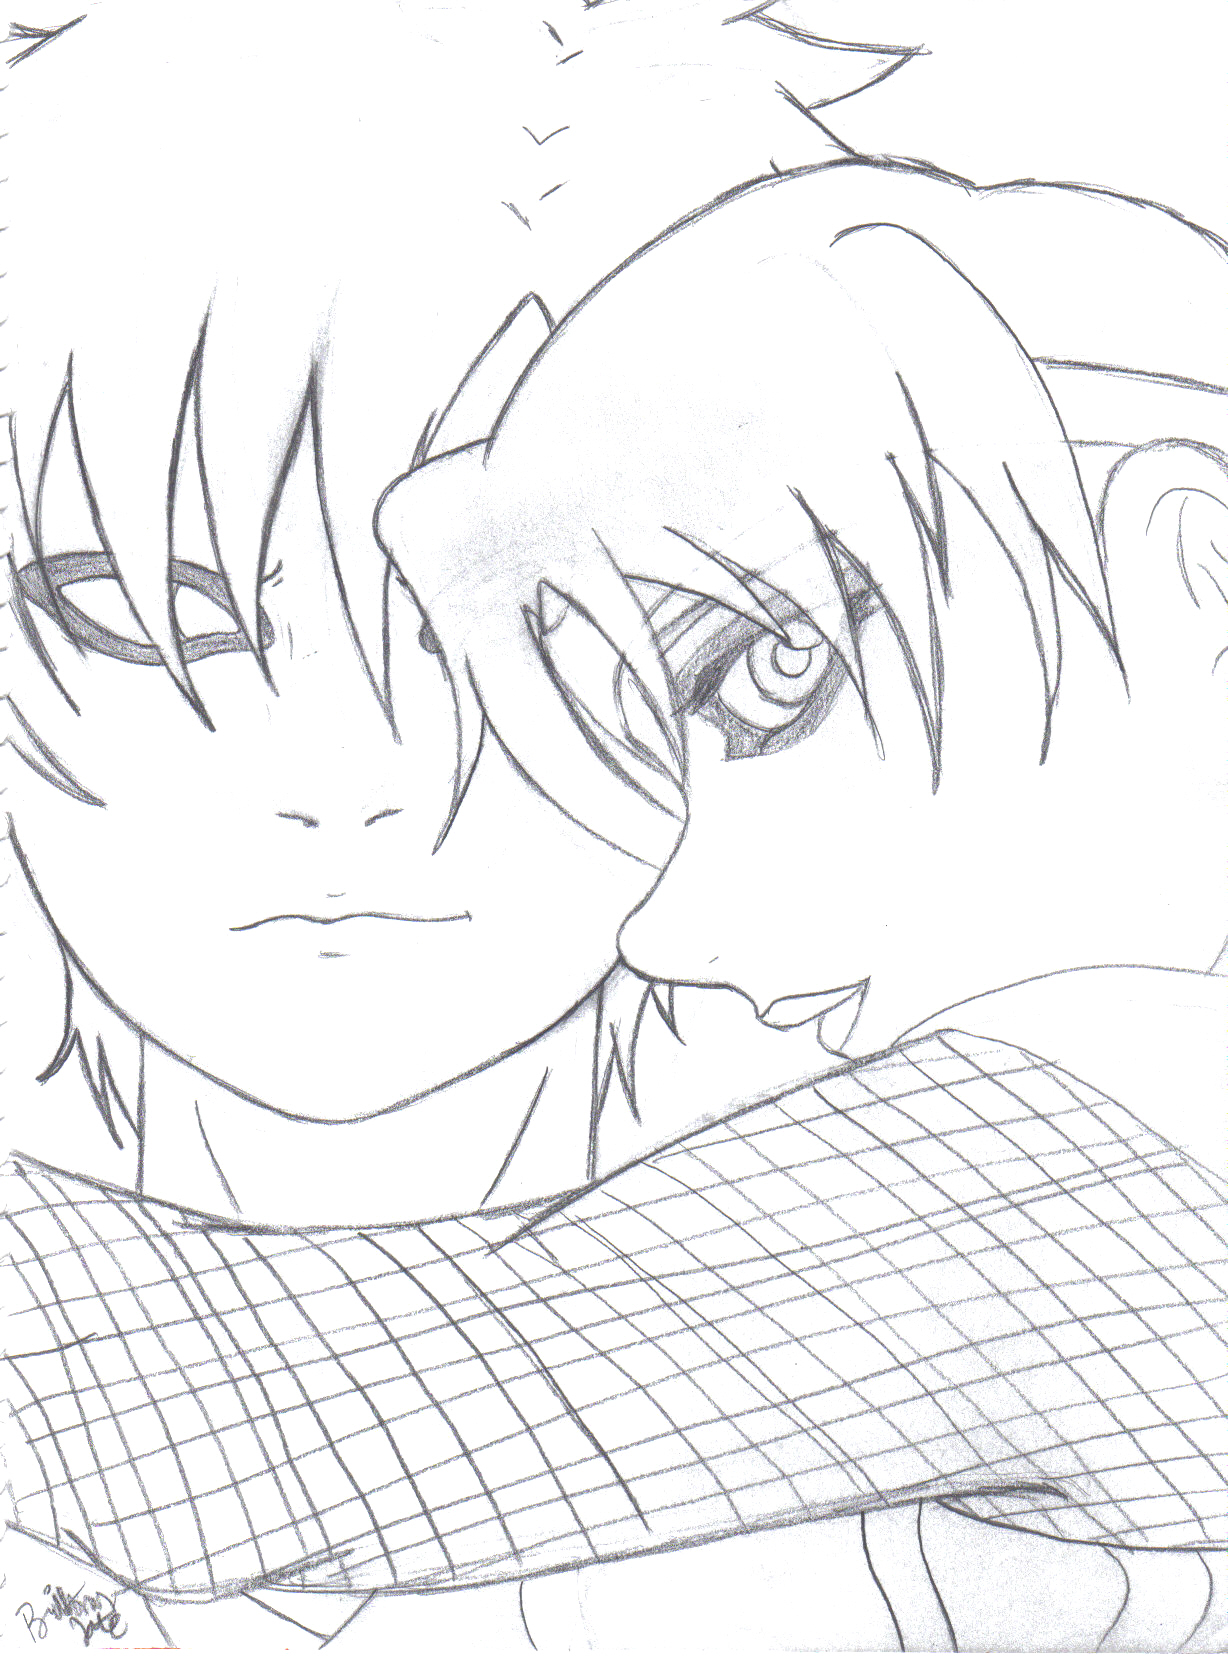 Kara and Gaara for Sketcher36's Contest by Kaybe